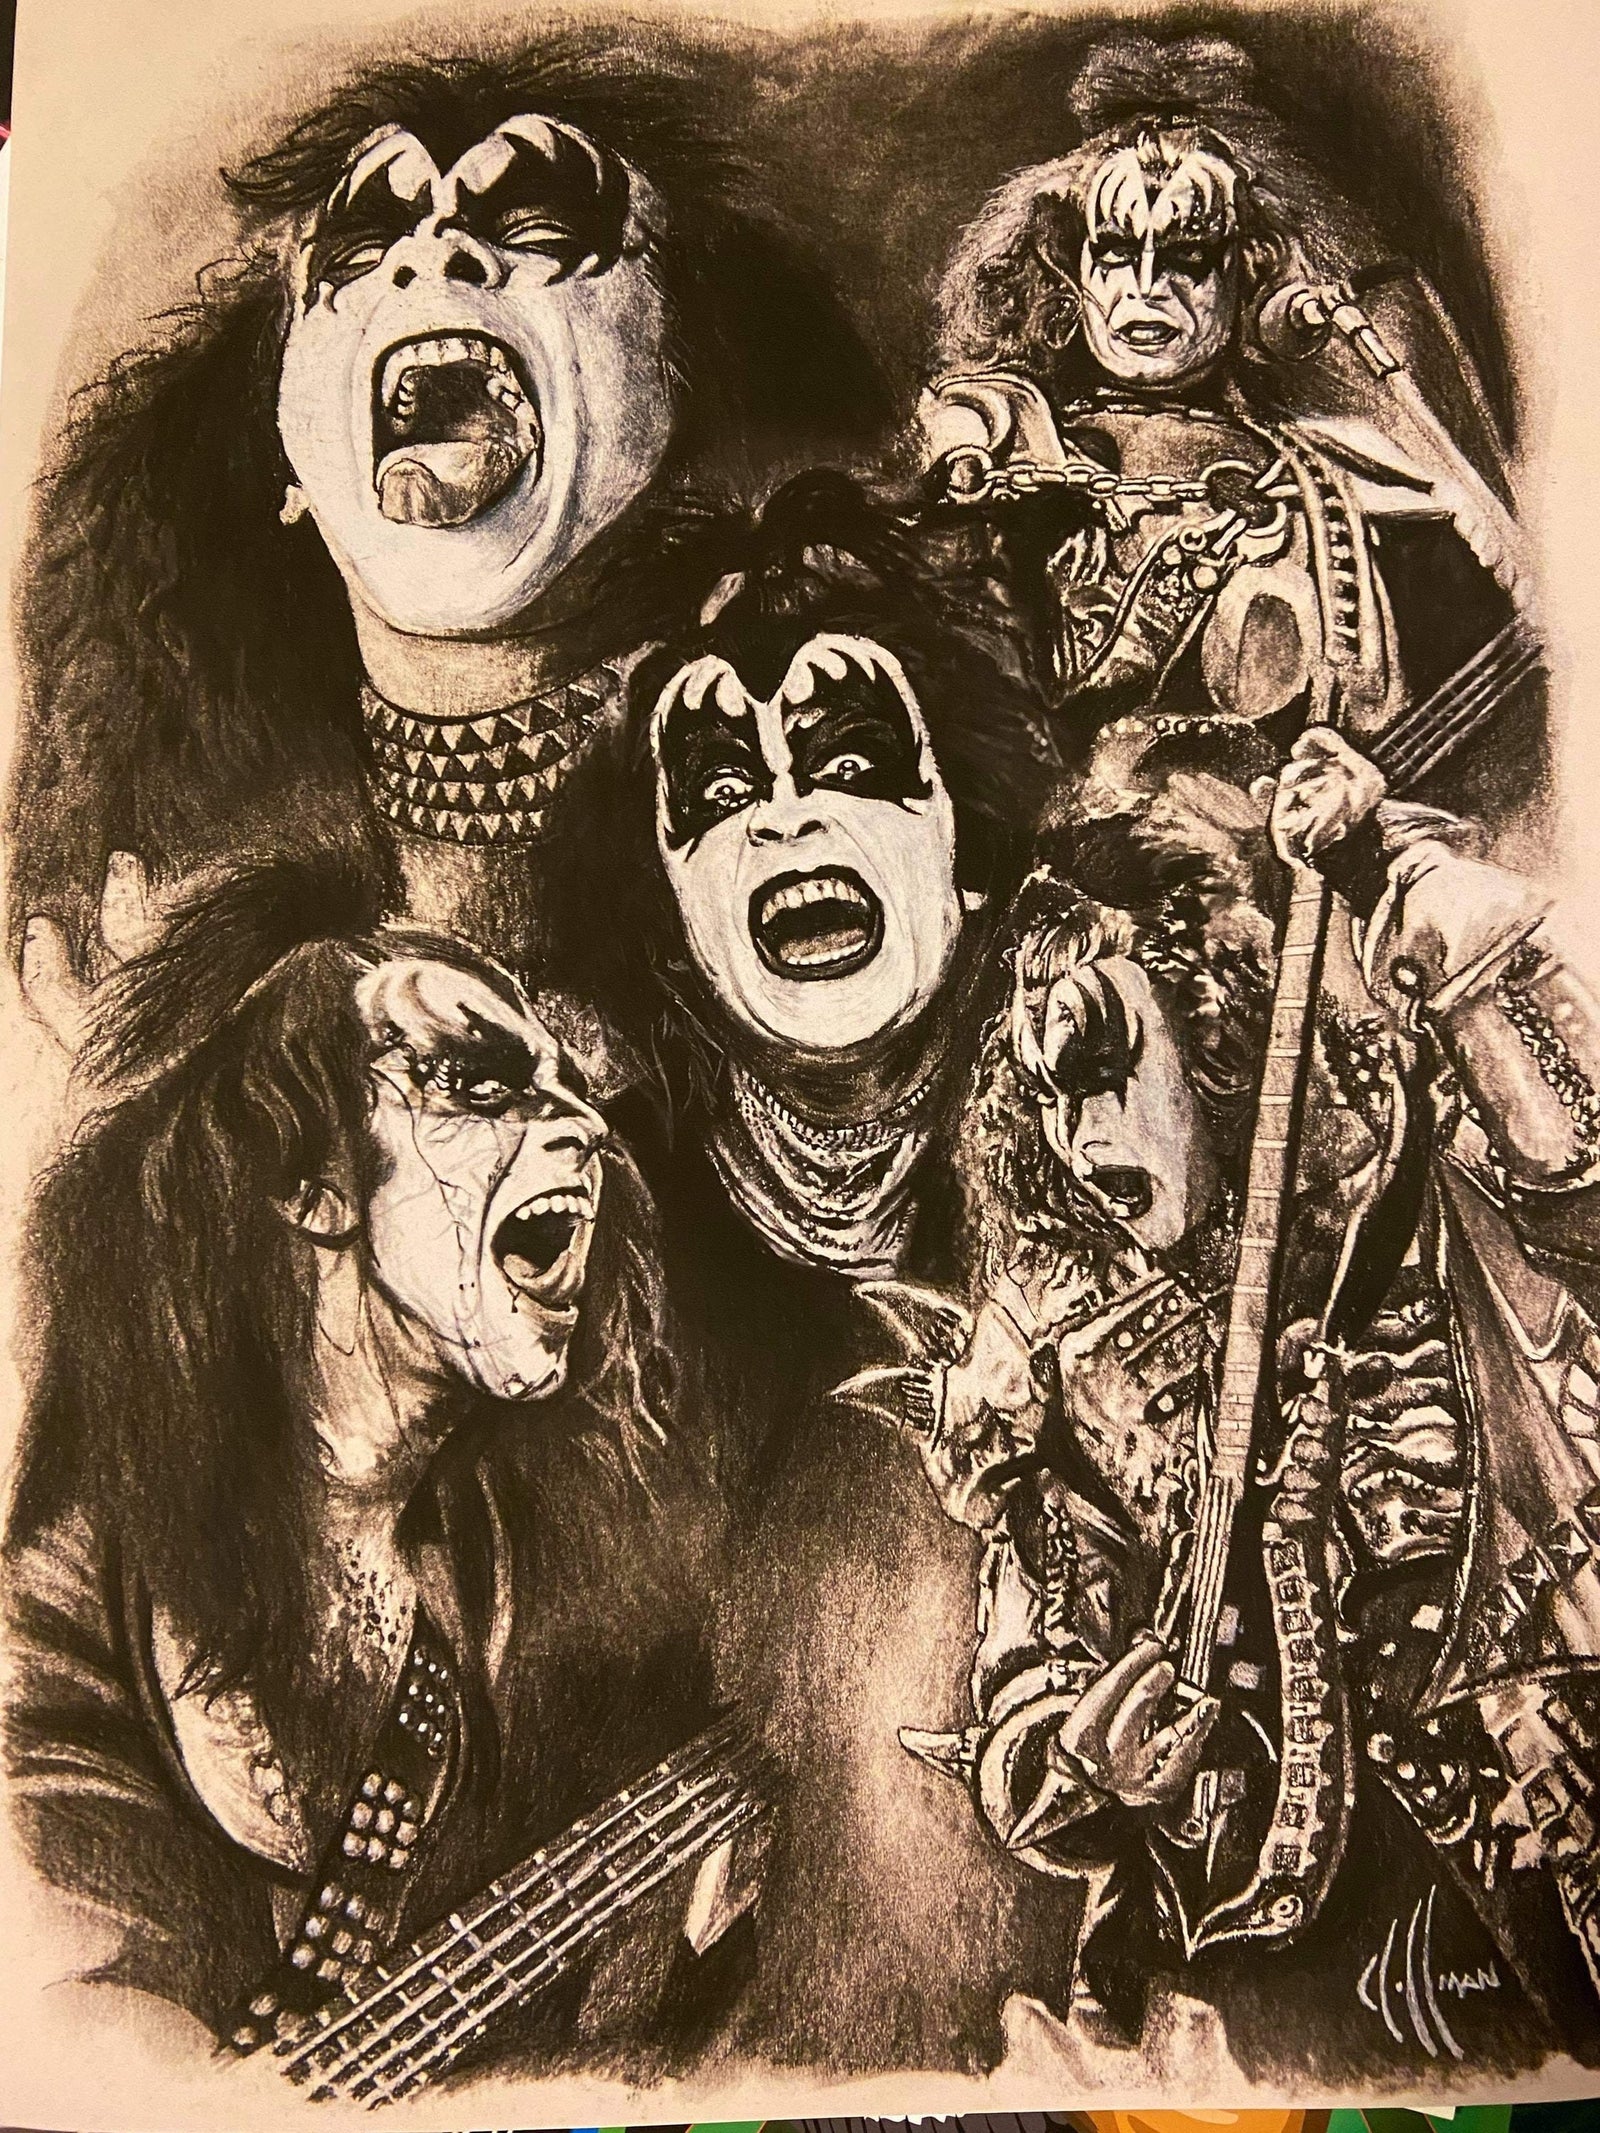 The Demon Iconic Poses in Charcoal Drawings